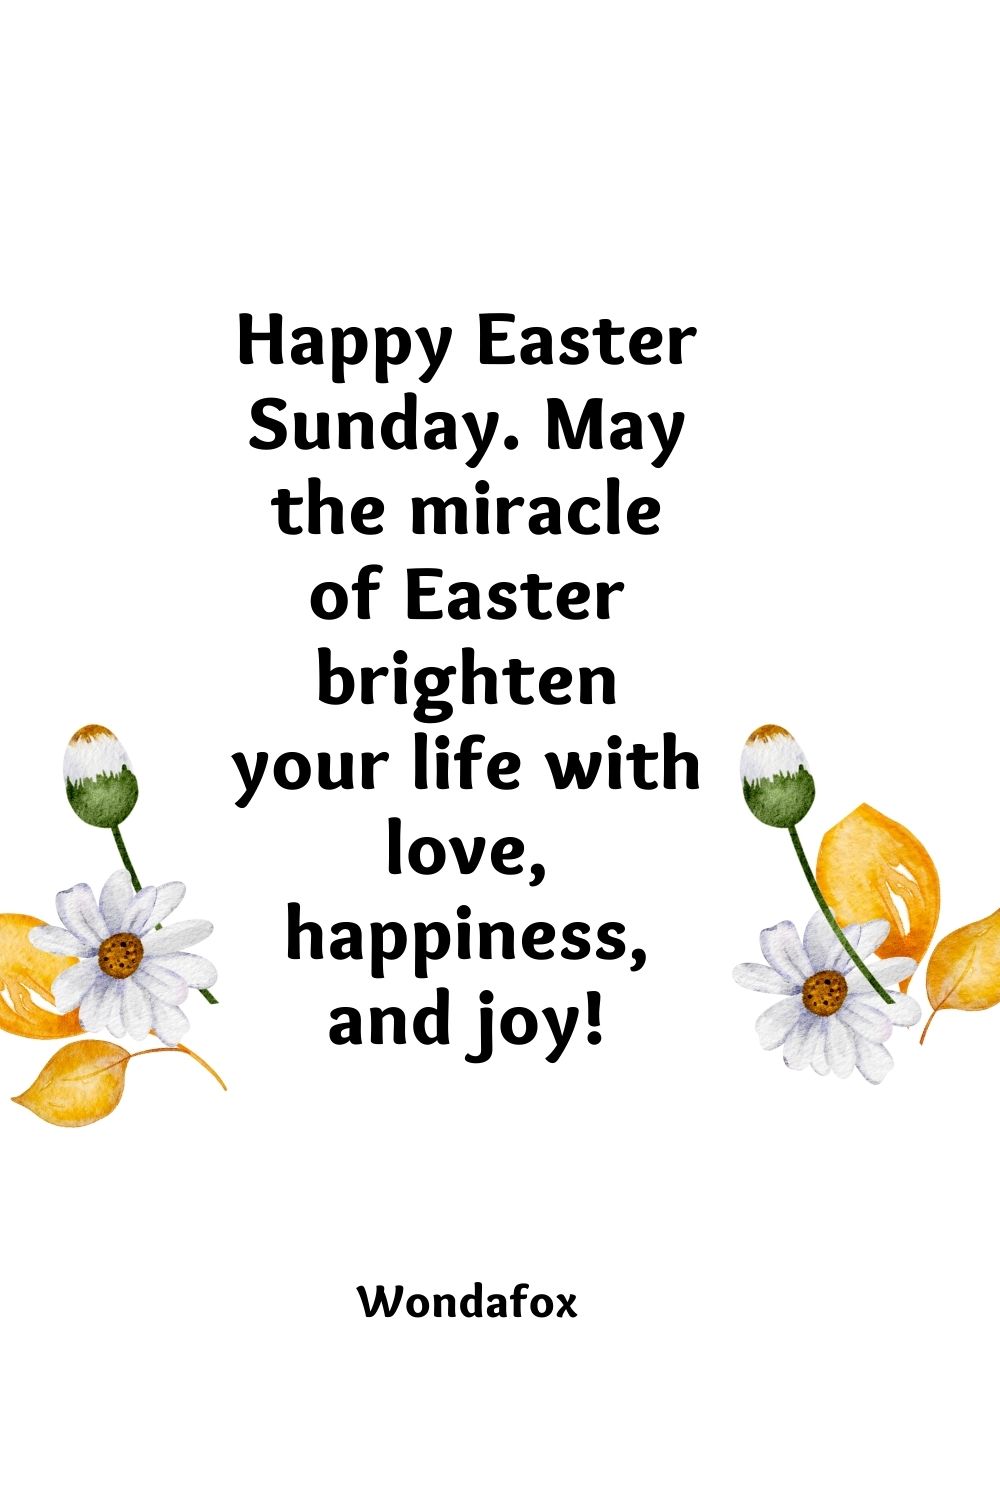 Happy Easter Sunday. May the miracle of Easter brighten your life with love, happiness, and joy!